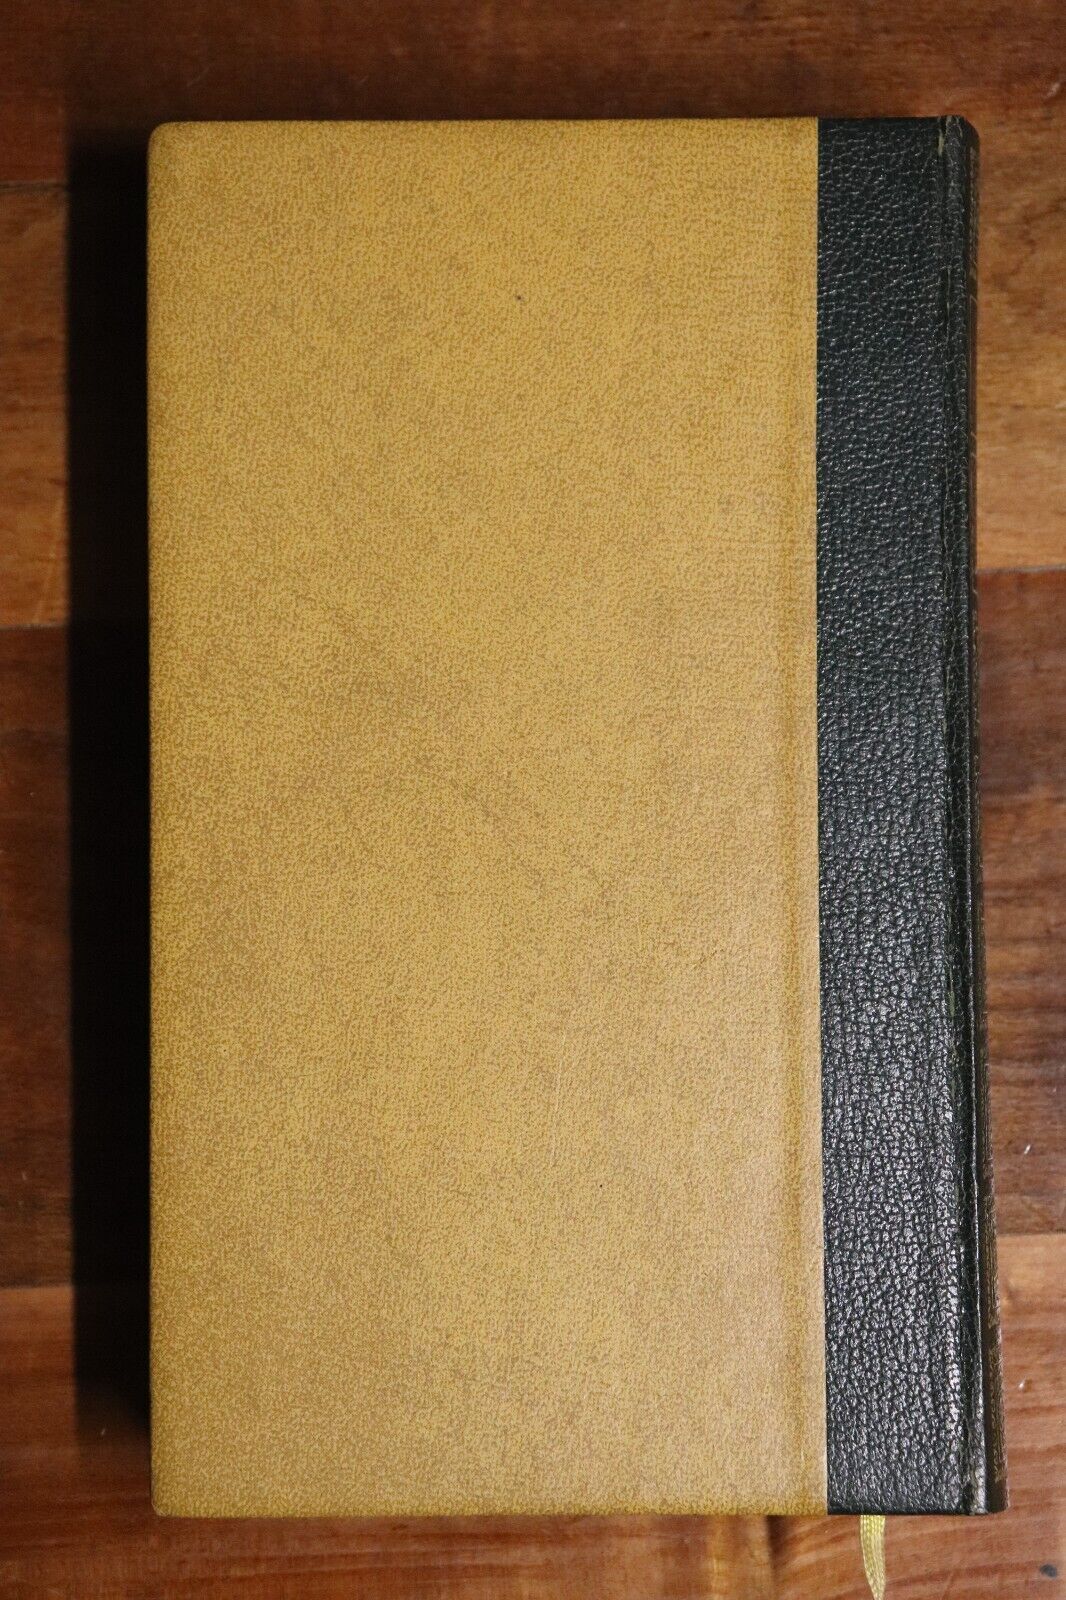 1968 The Voyage Of The Beagle Vintage Charles Darwin Book